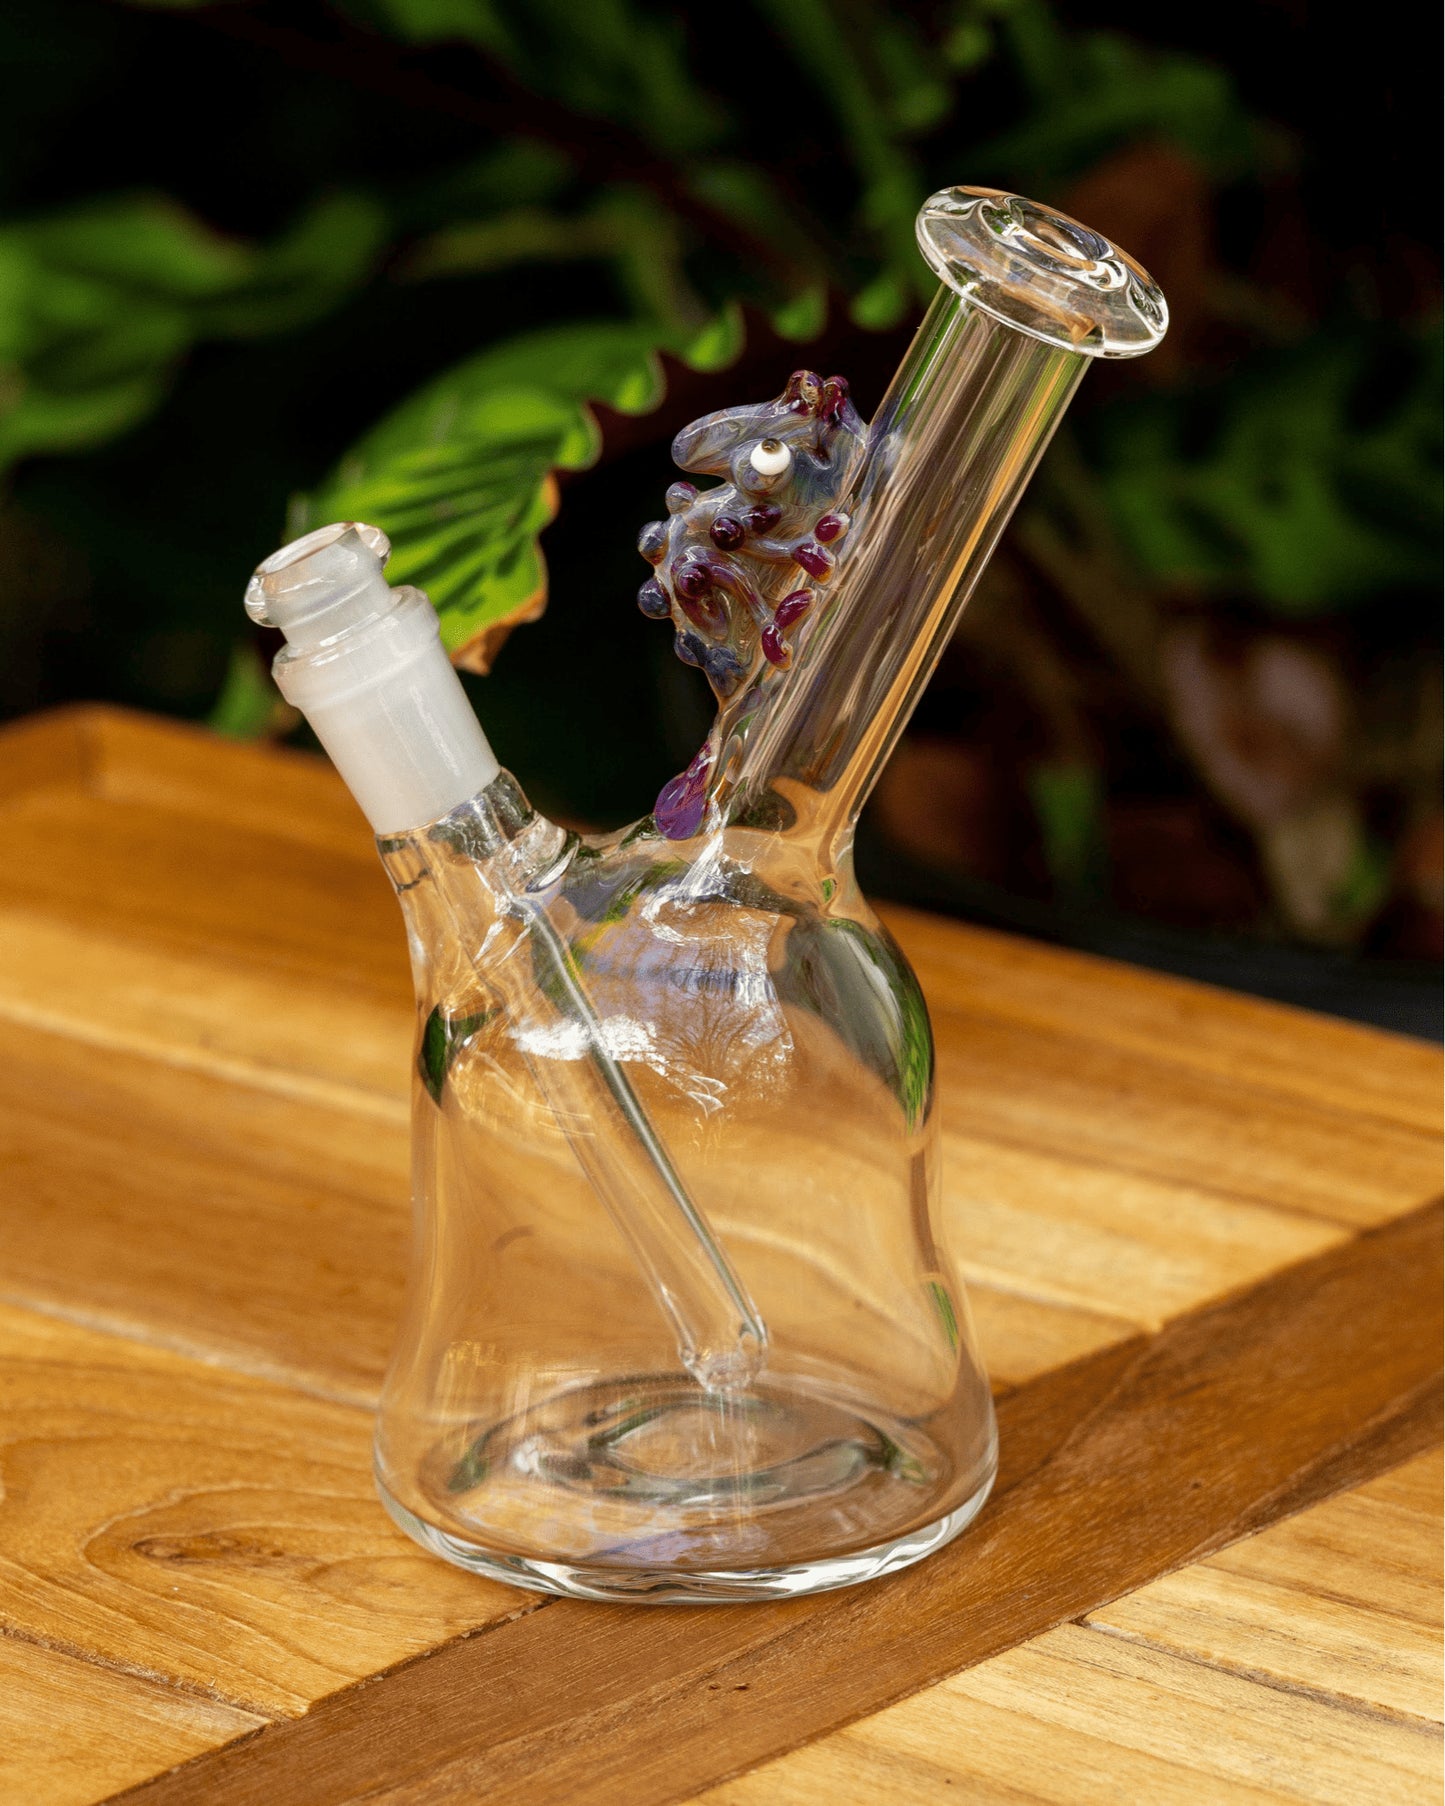 meticulously crafted design of the Clear Rig w/ Amber Purple Chameleon (E) by Willy That Glass Guy